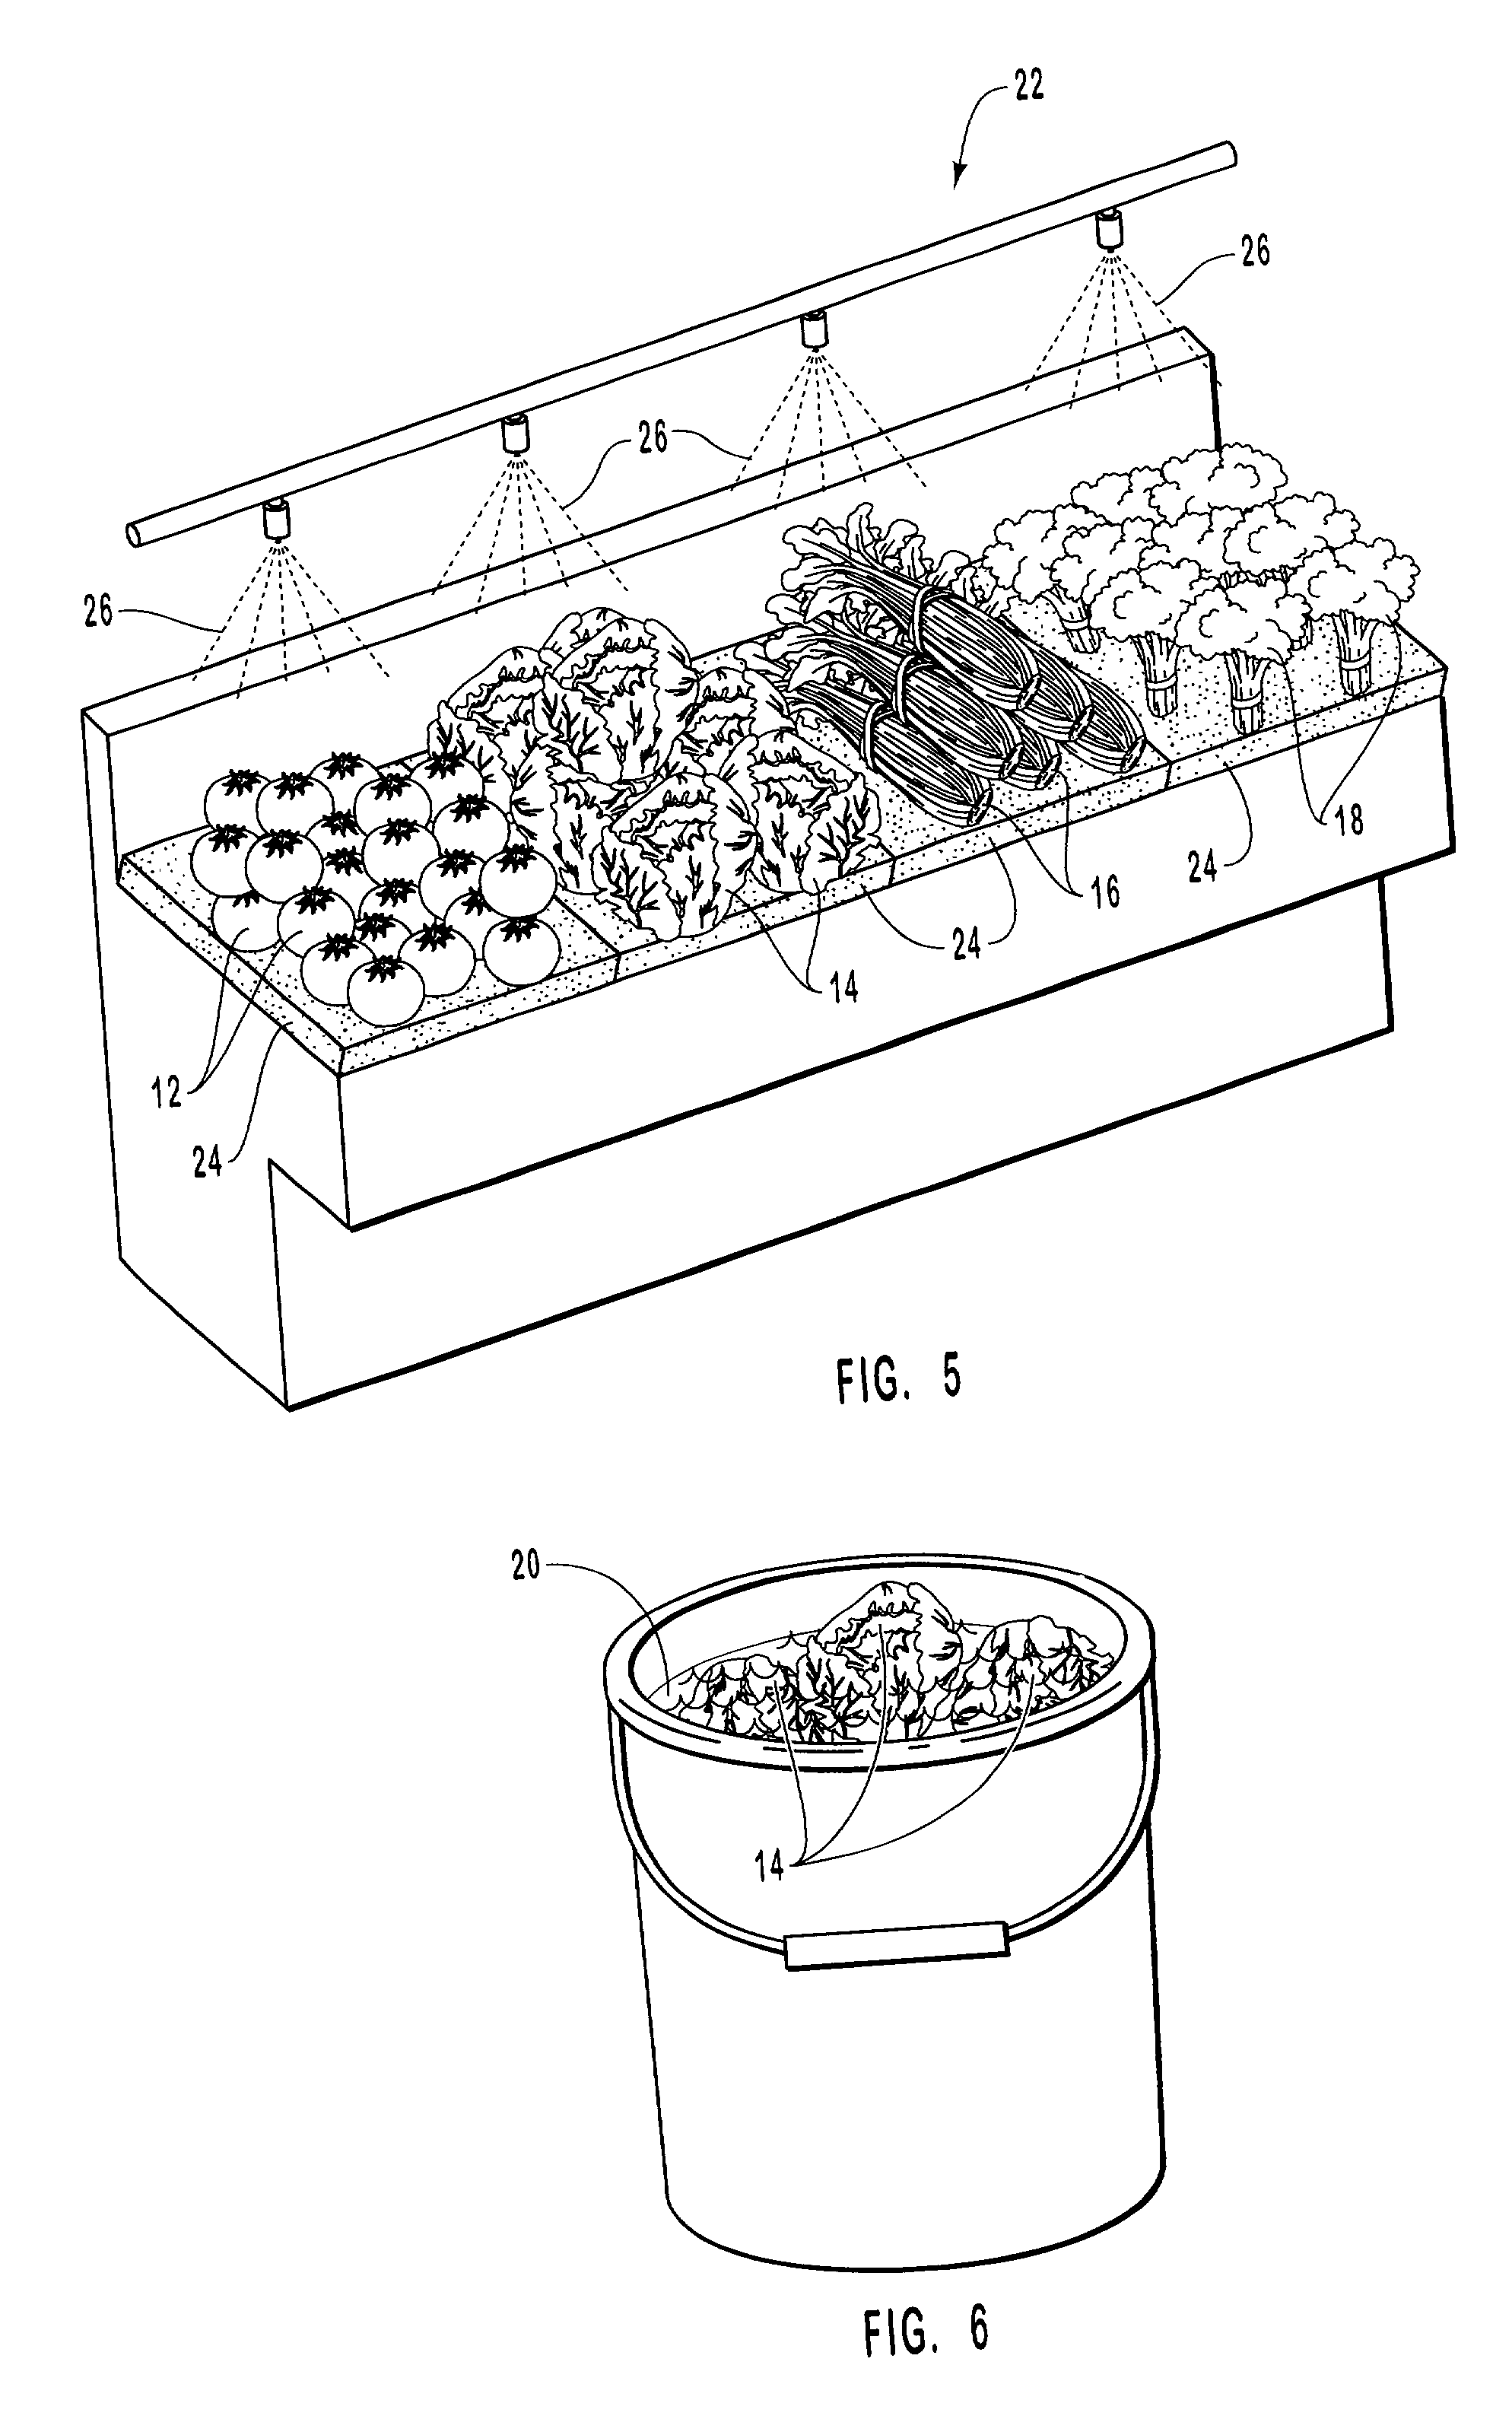 Treatment of perishable products using aqueous chemical composition